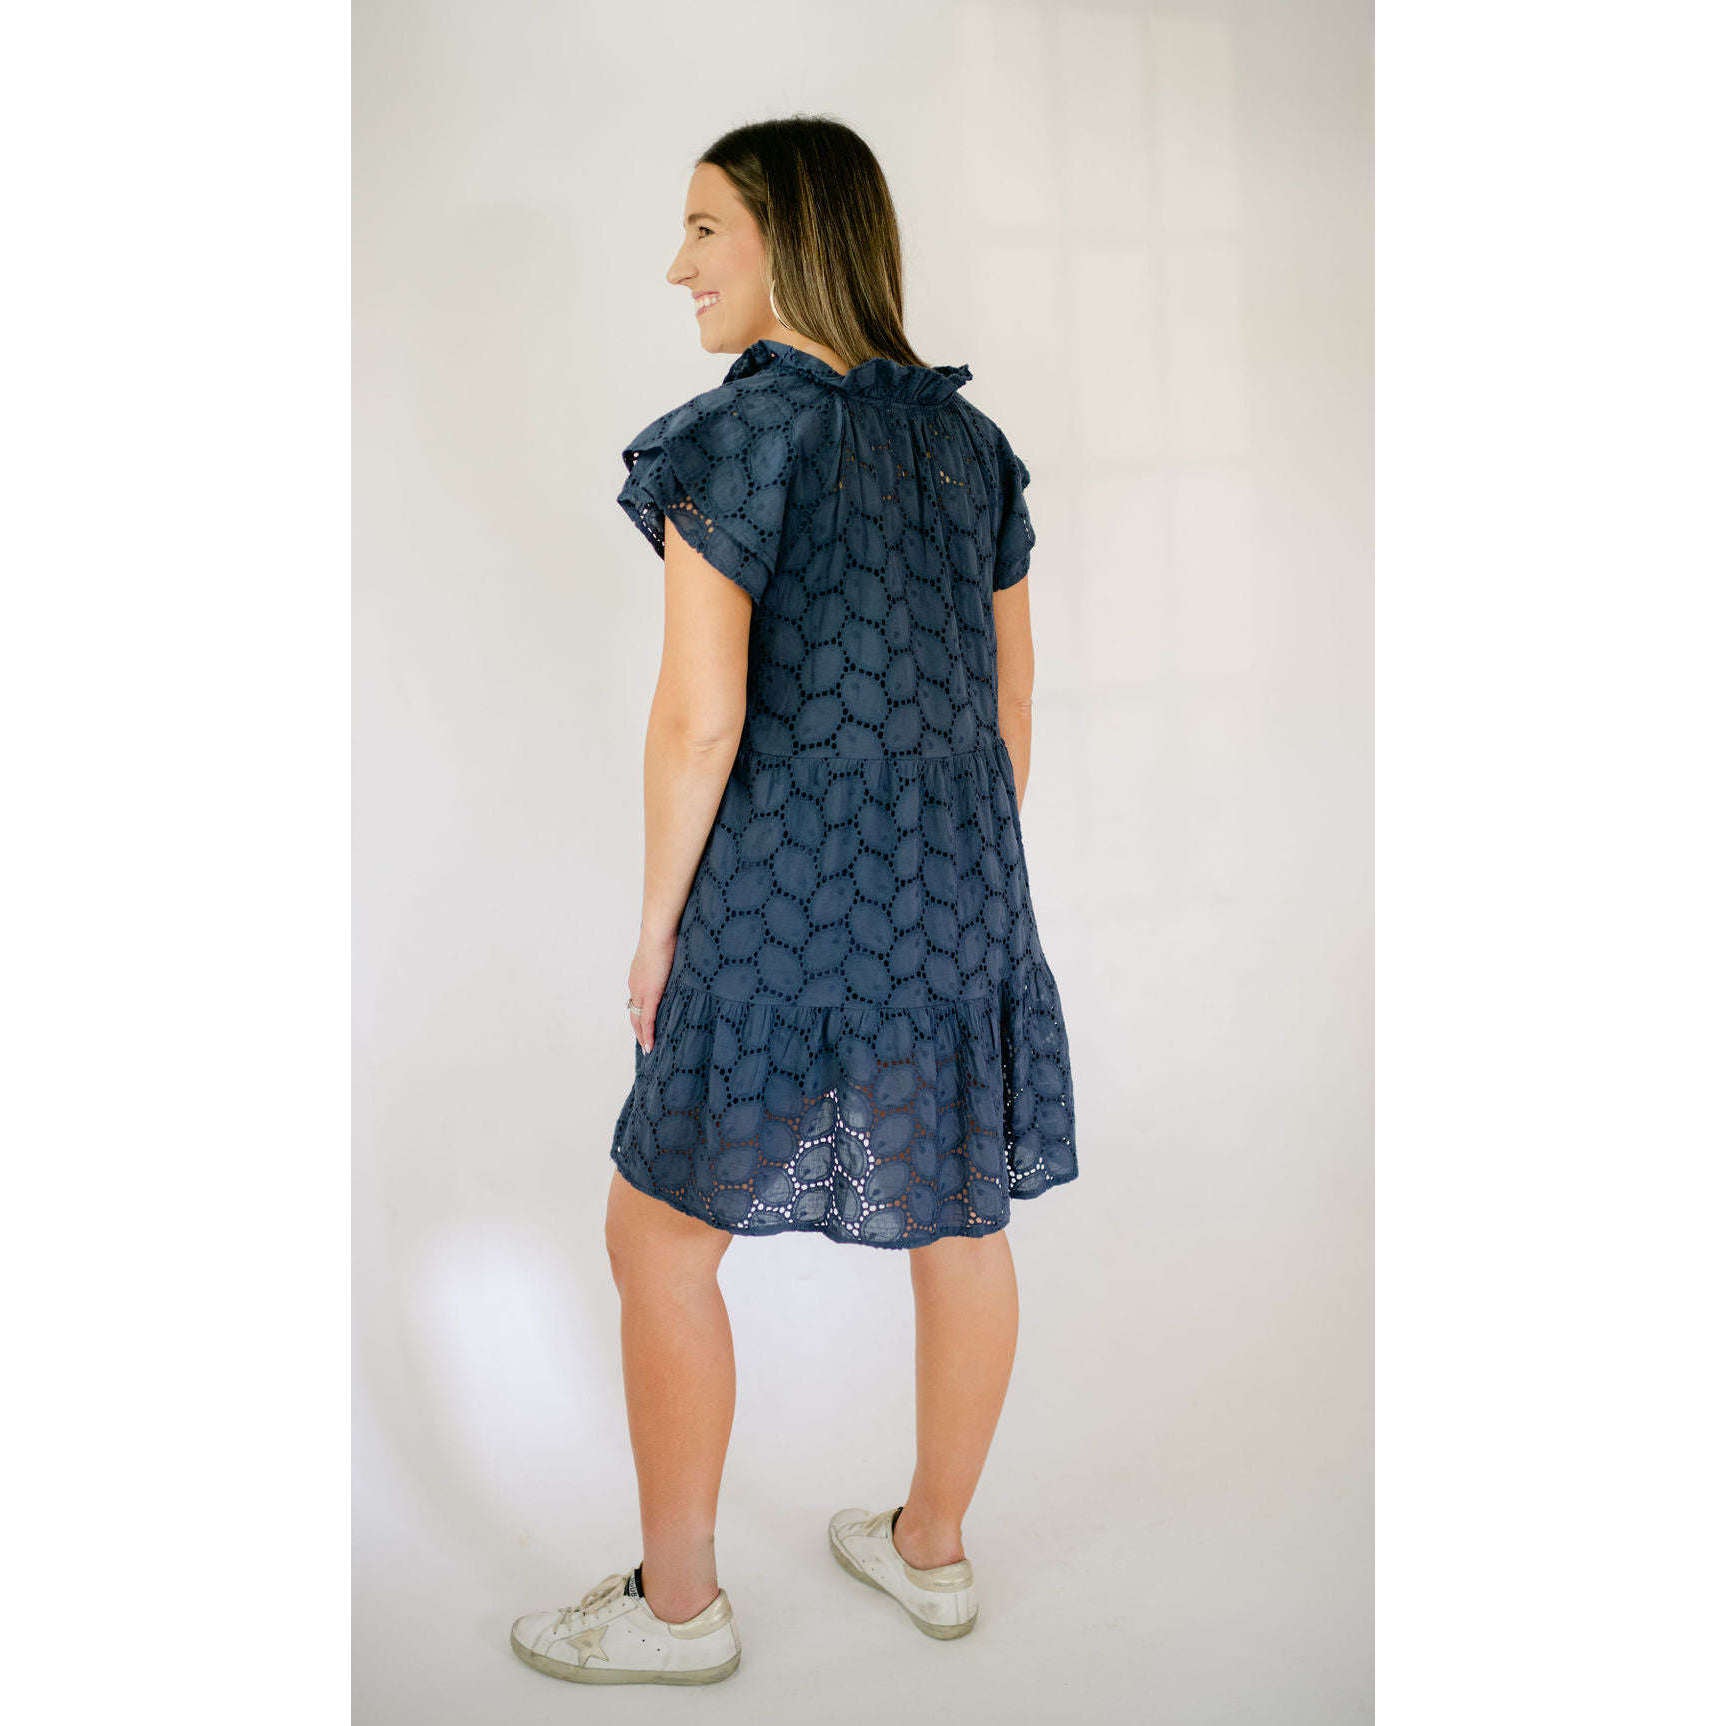 8.28 Boutique:Sofia Collections,Sofia Collections Jules Eyelet Navy Dress,Dress